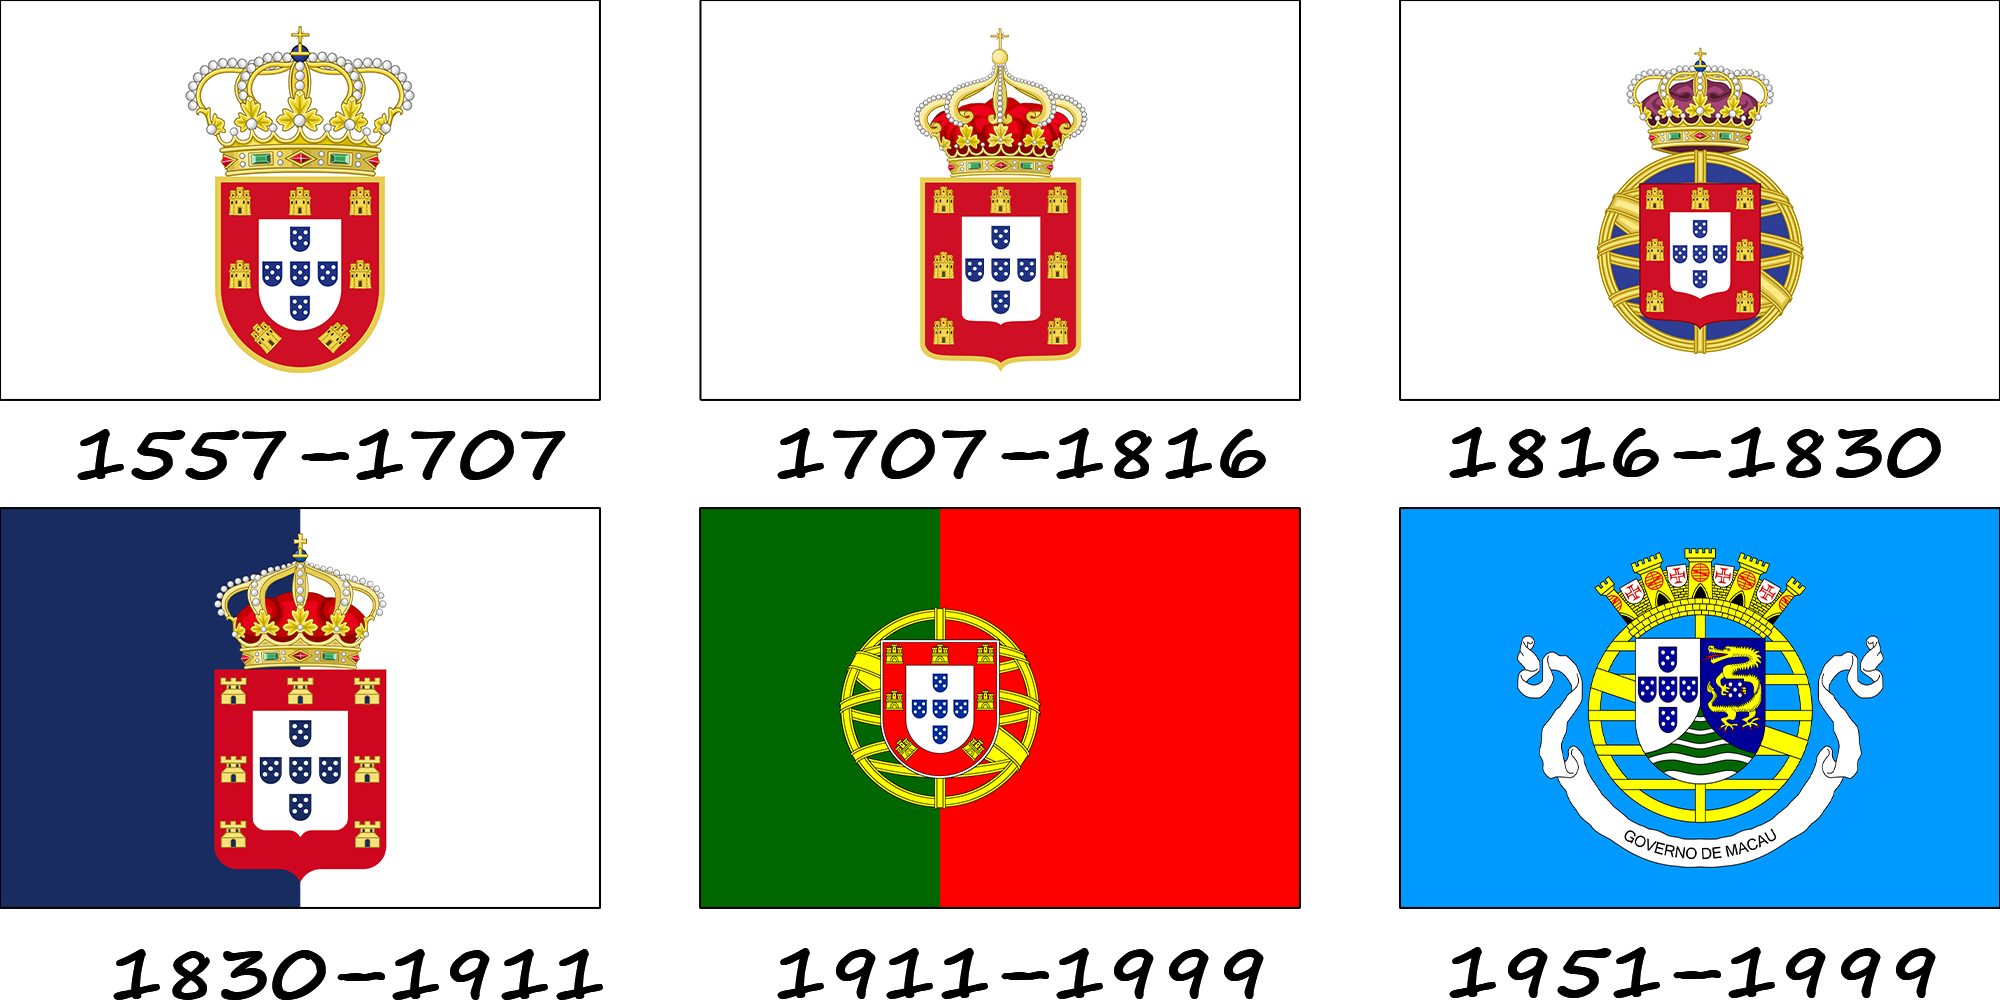 The evolution of the Macau flag from Portuguese to Macau's own. The history of the Macau flag